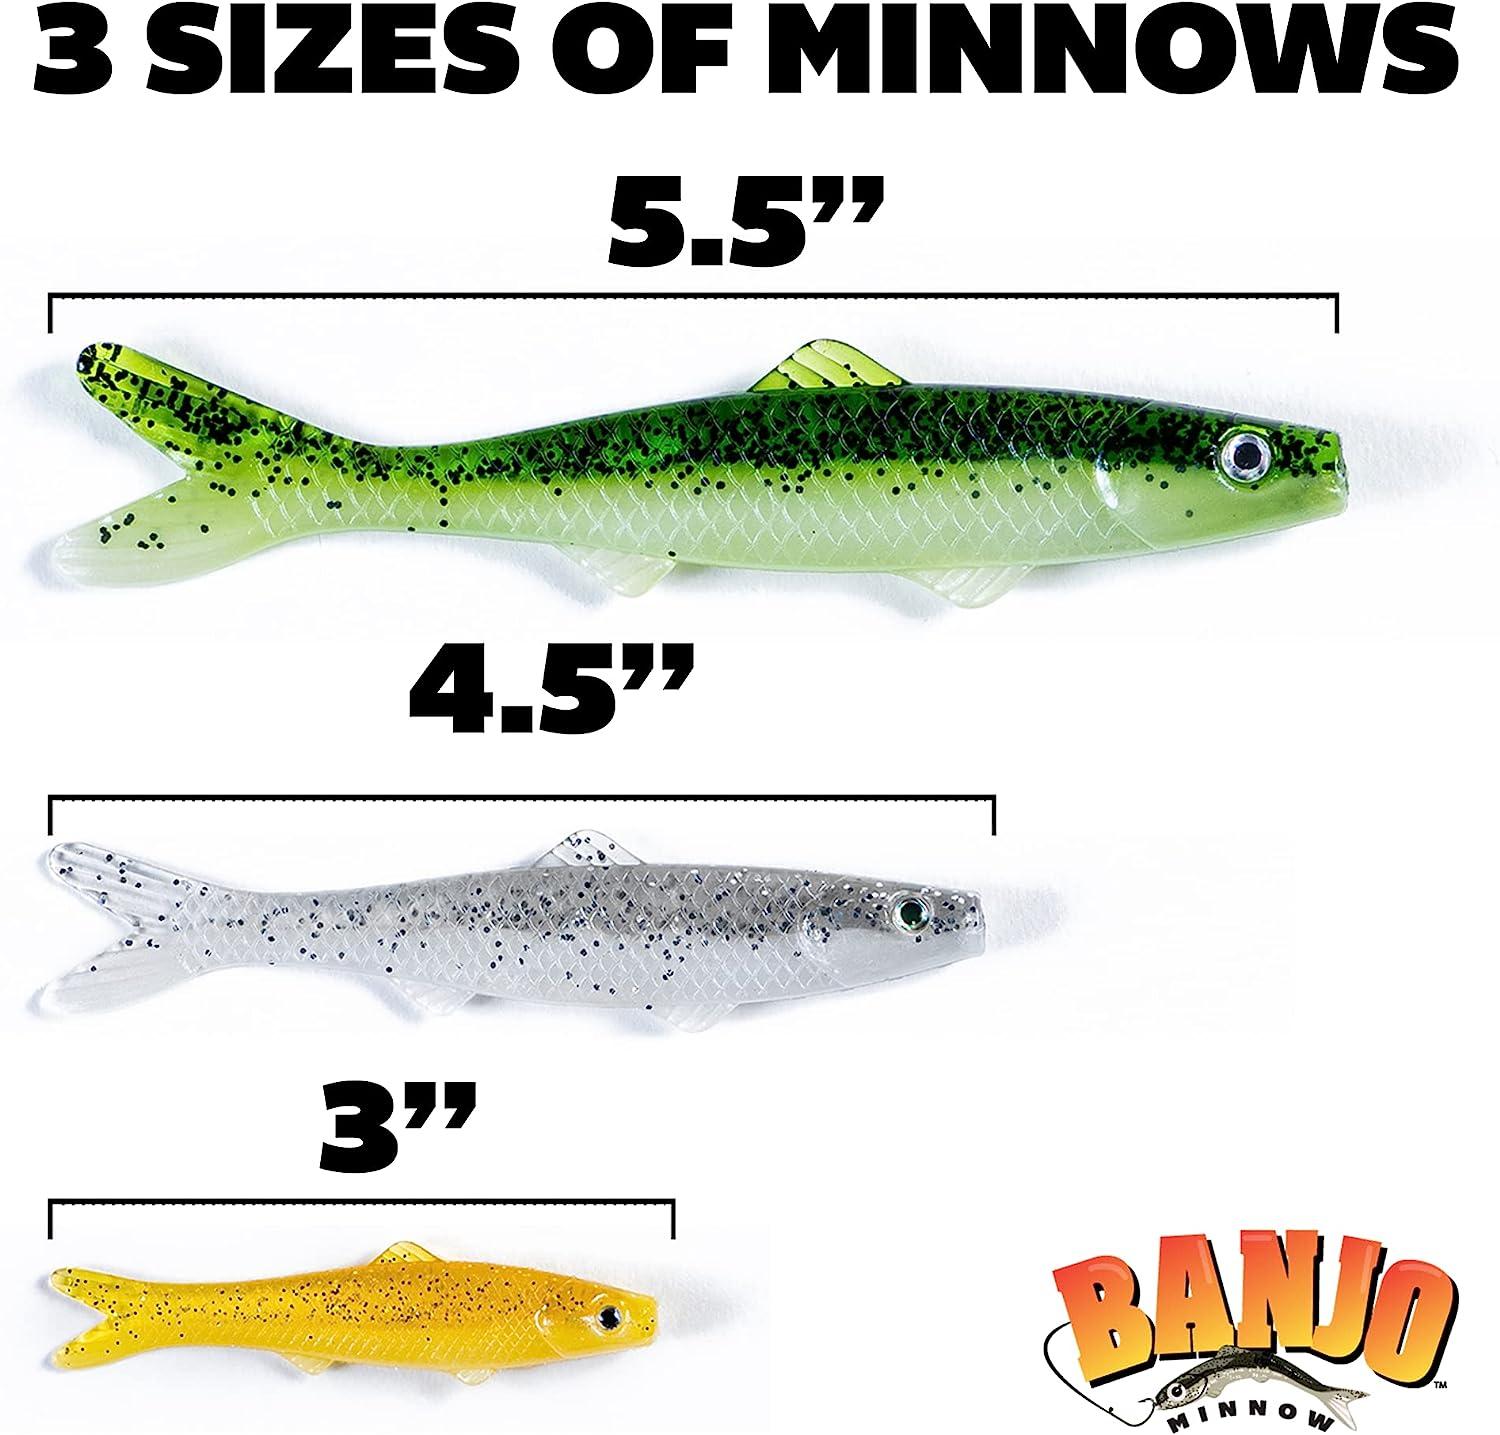 Banjo Minnow 102 Piece Kit + Lifelike Lure for All Fish + Durable Material  That Catches Fish + Freshwater & Saltwater Fishing Lure + Hooks & Anchors